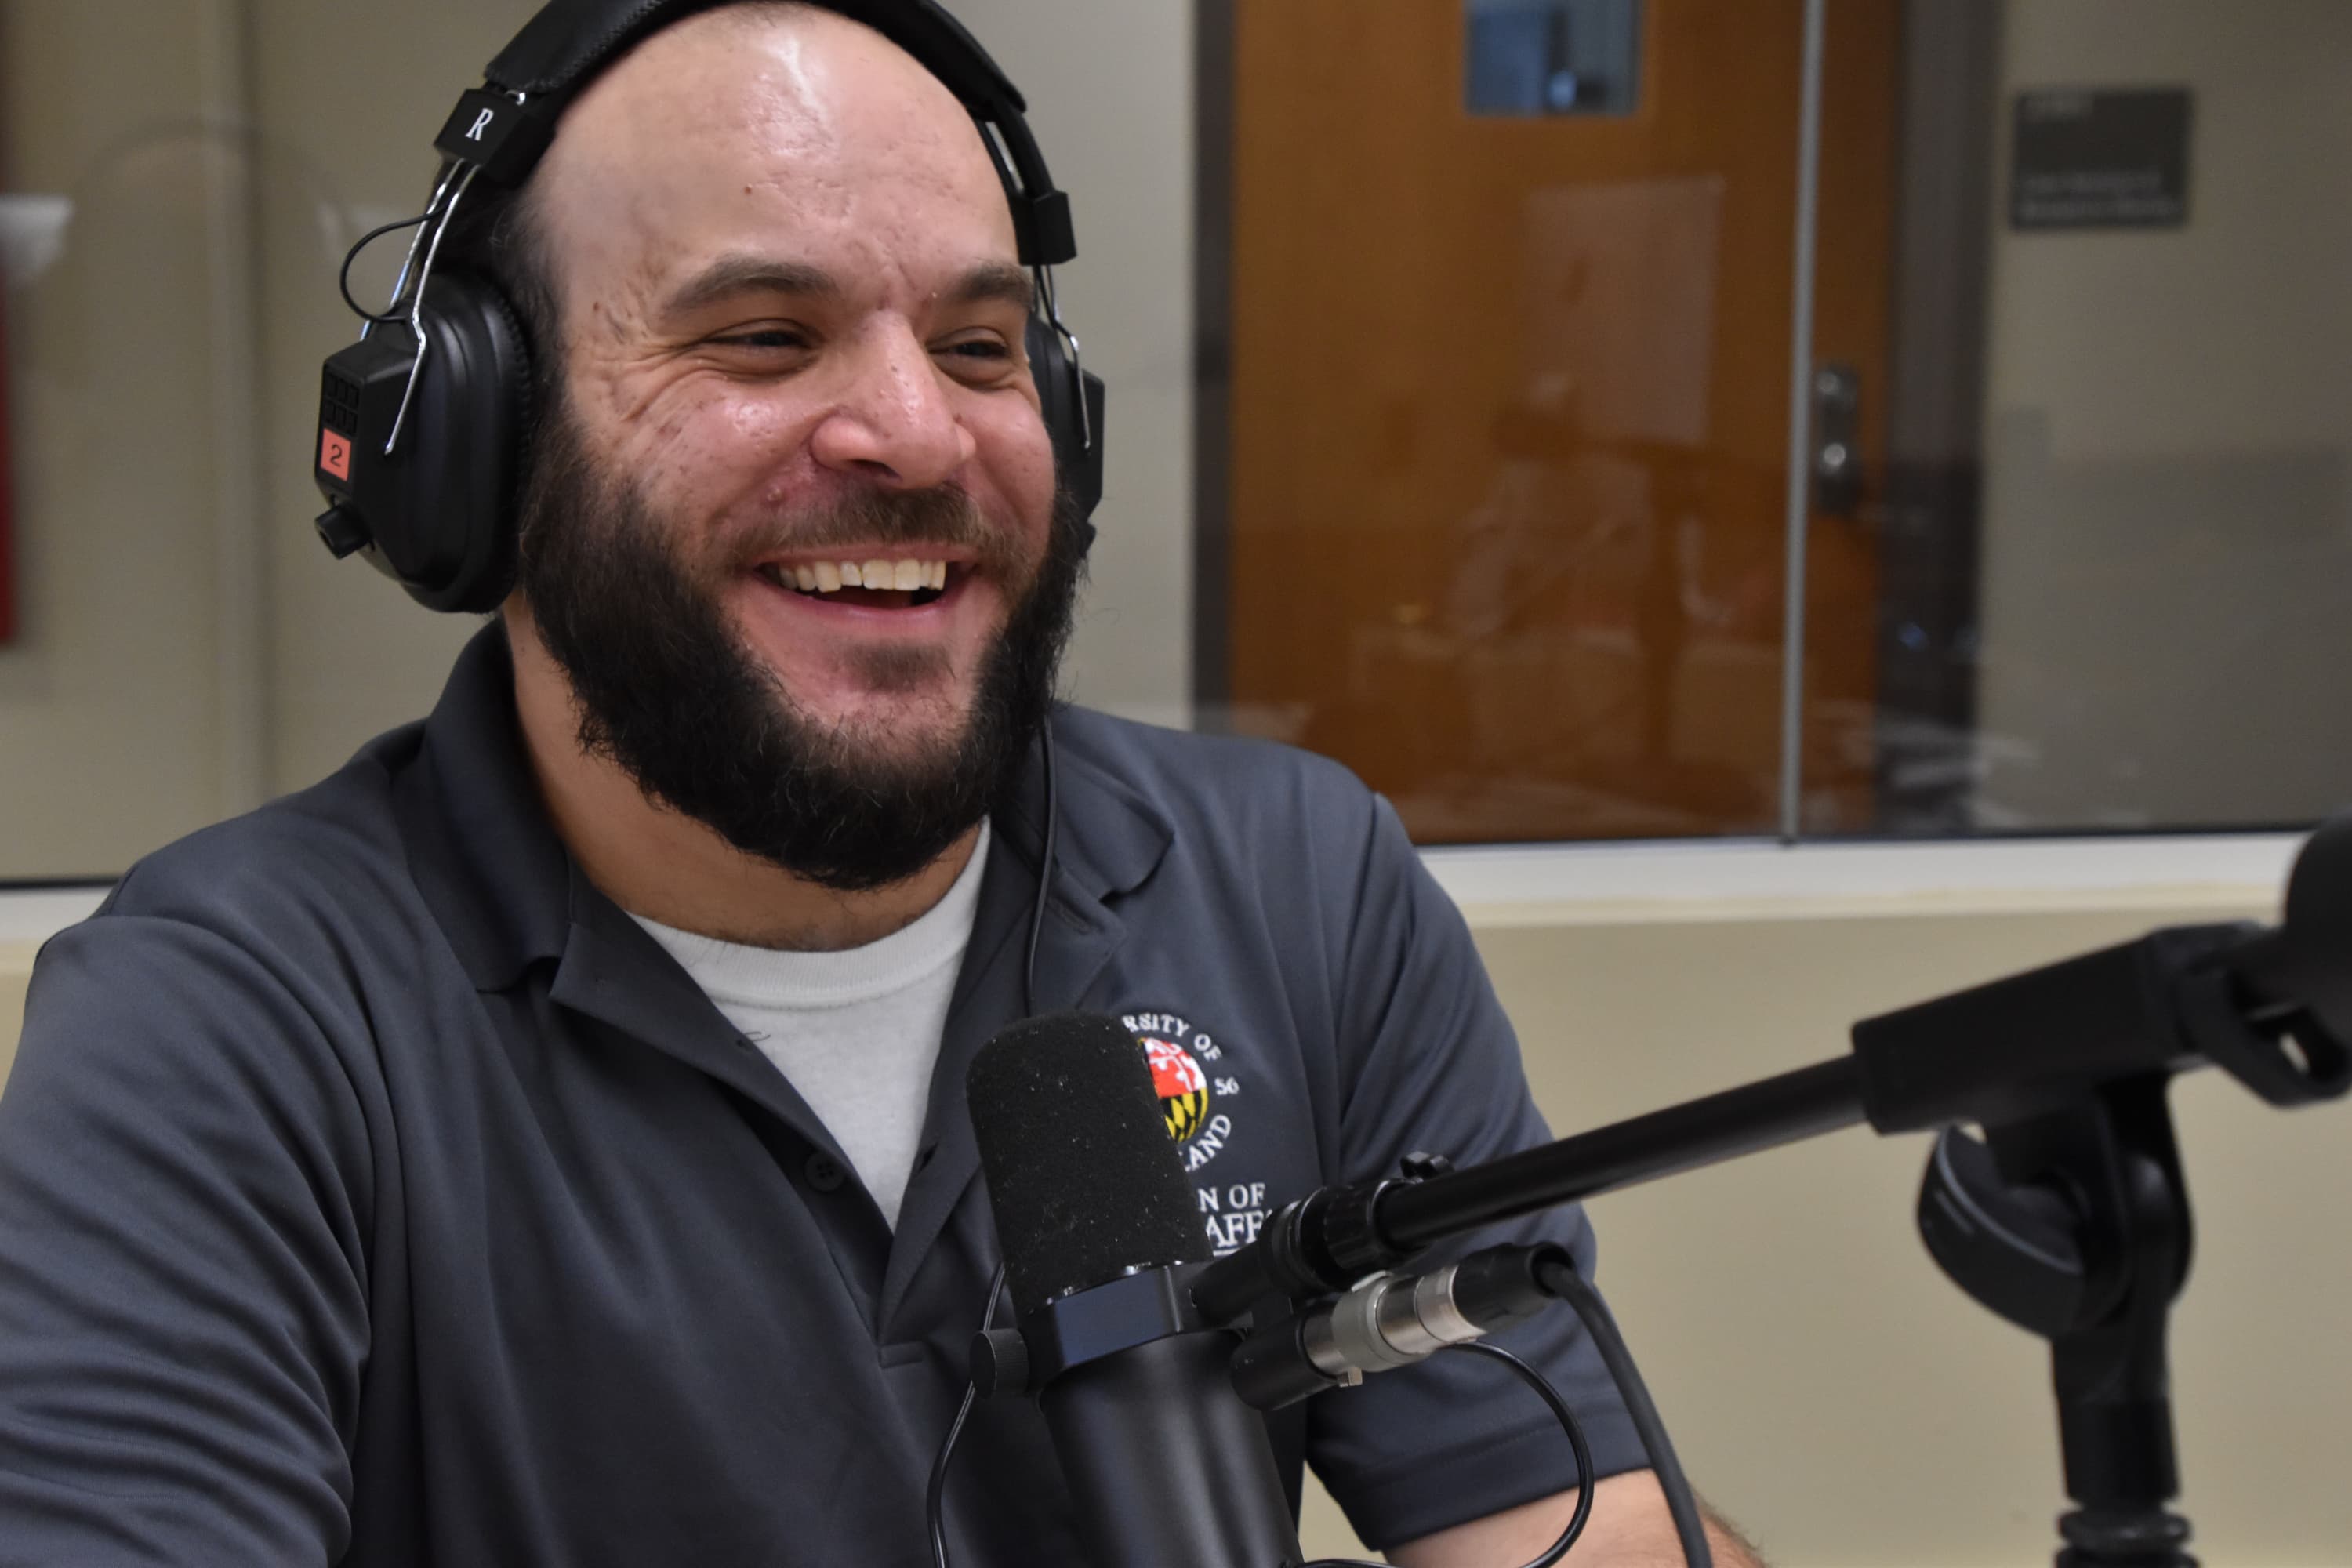 Ray Nardella laughing and sitting in front of a mic with headphones on